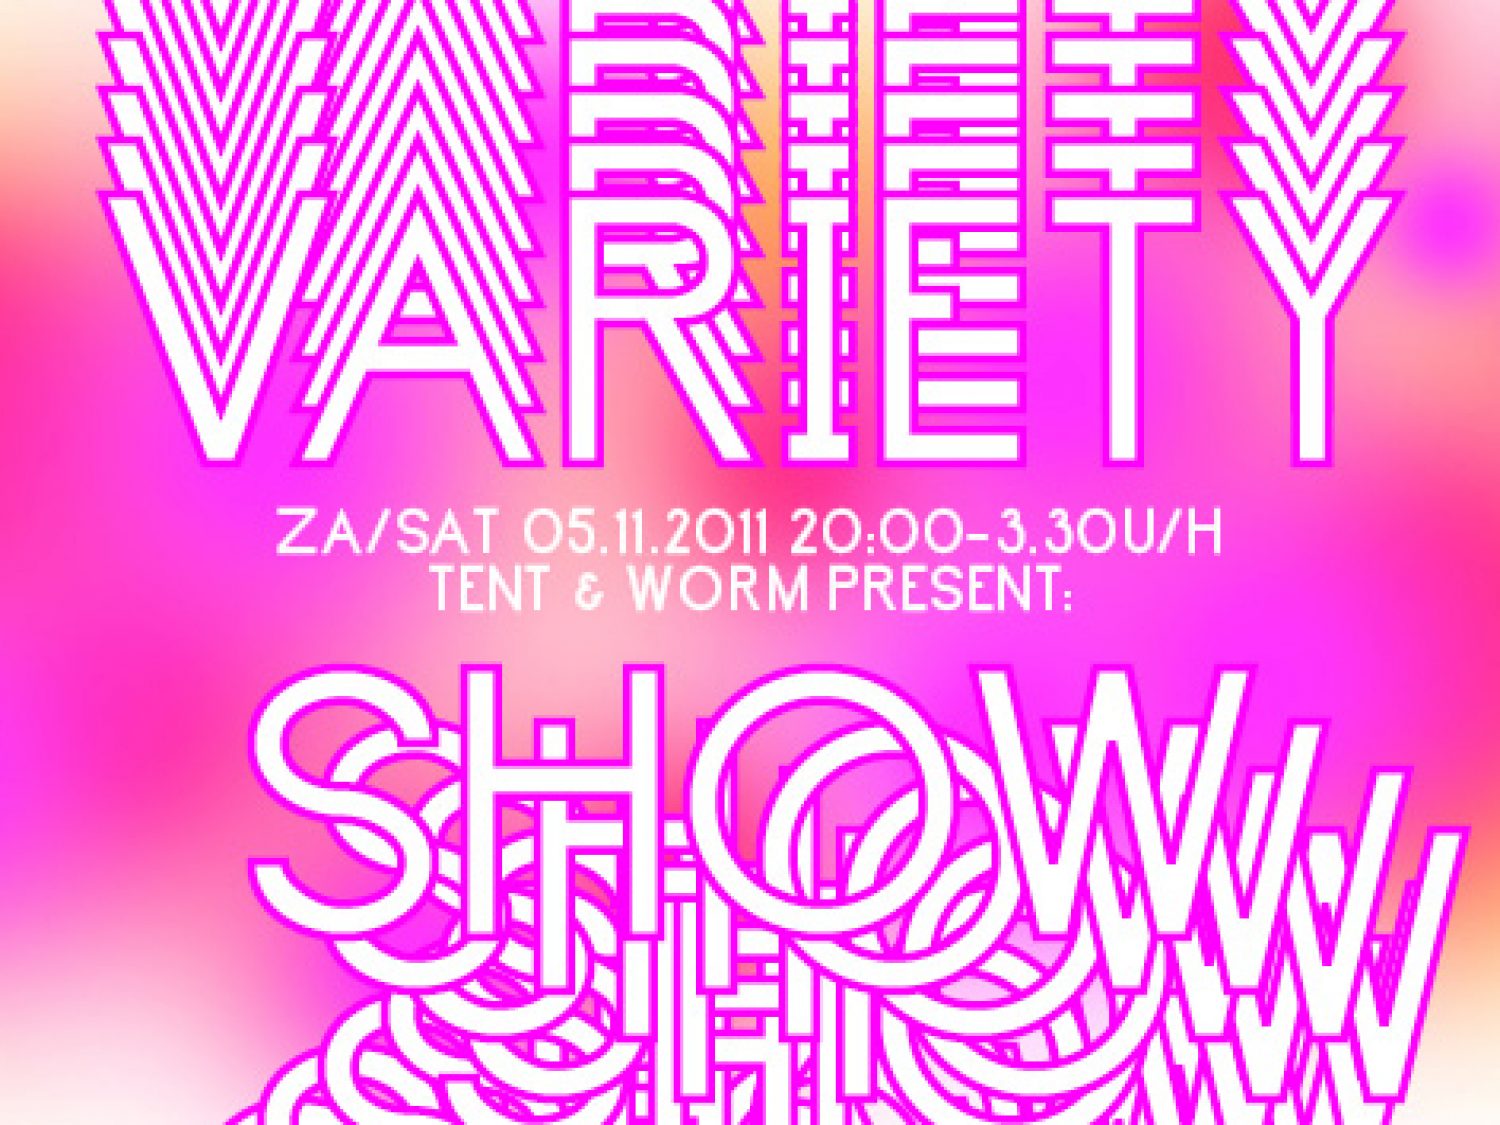 TENT & WORM present Variety Show